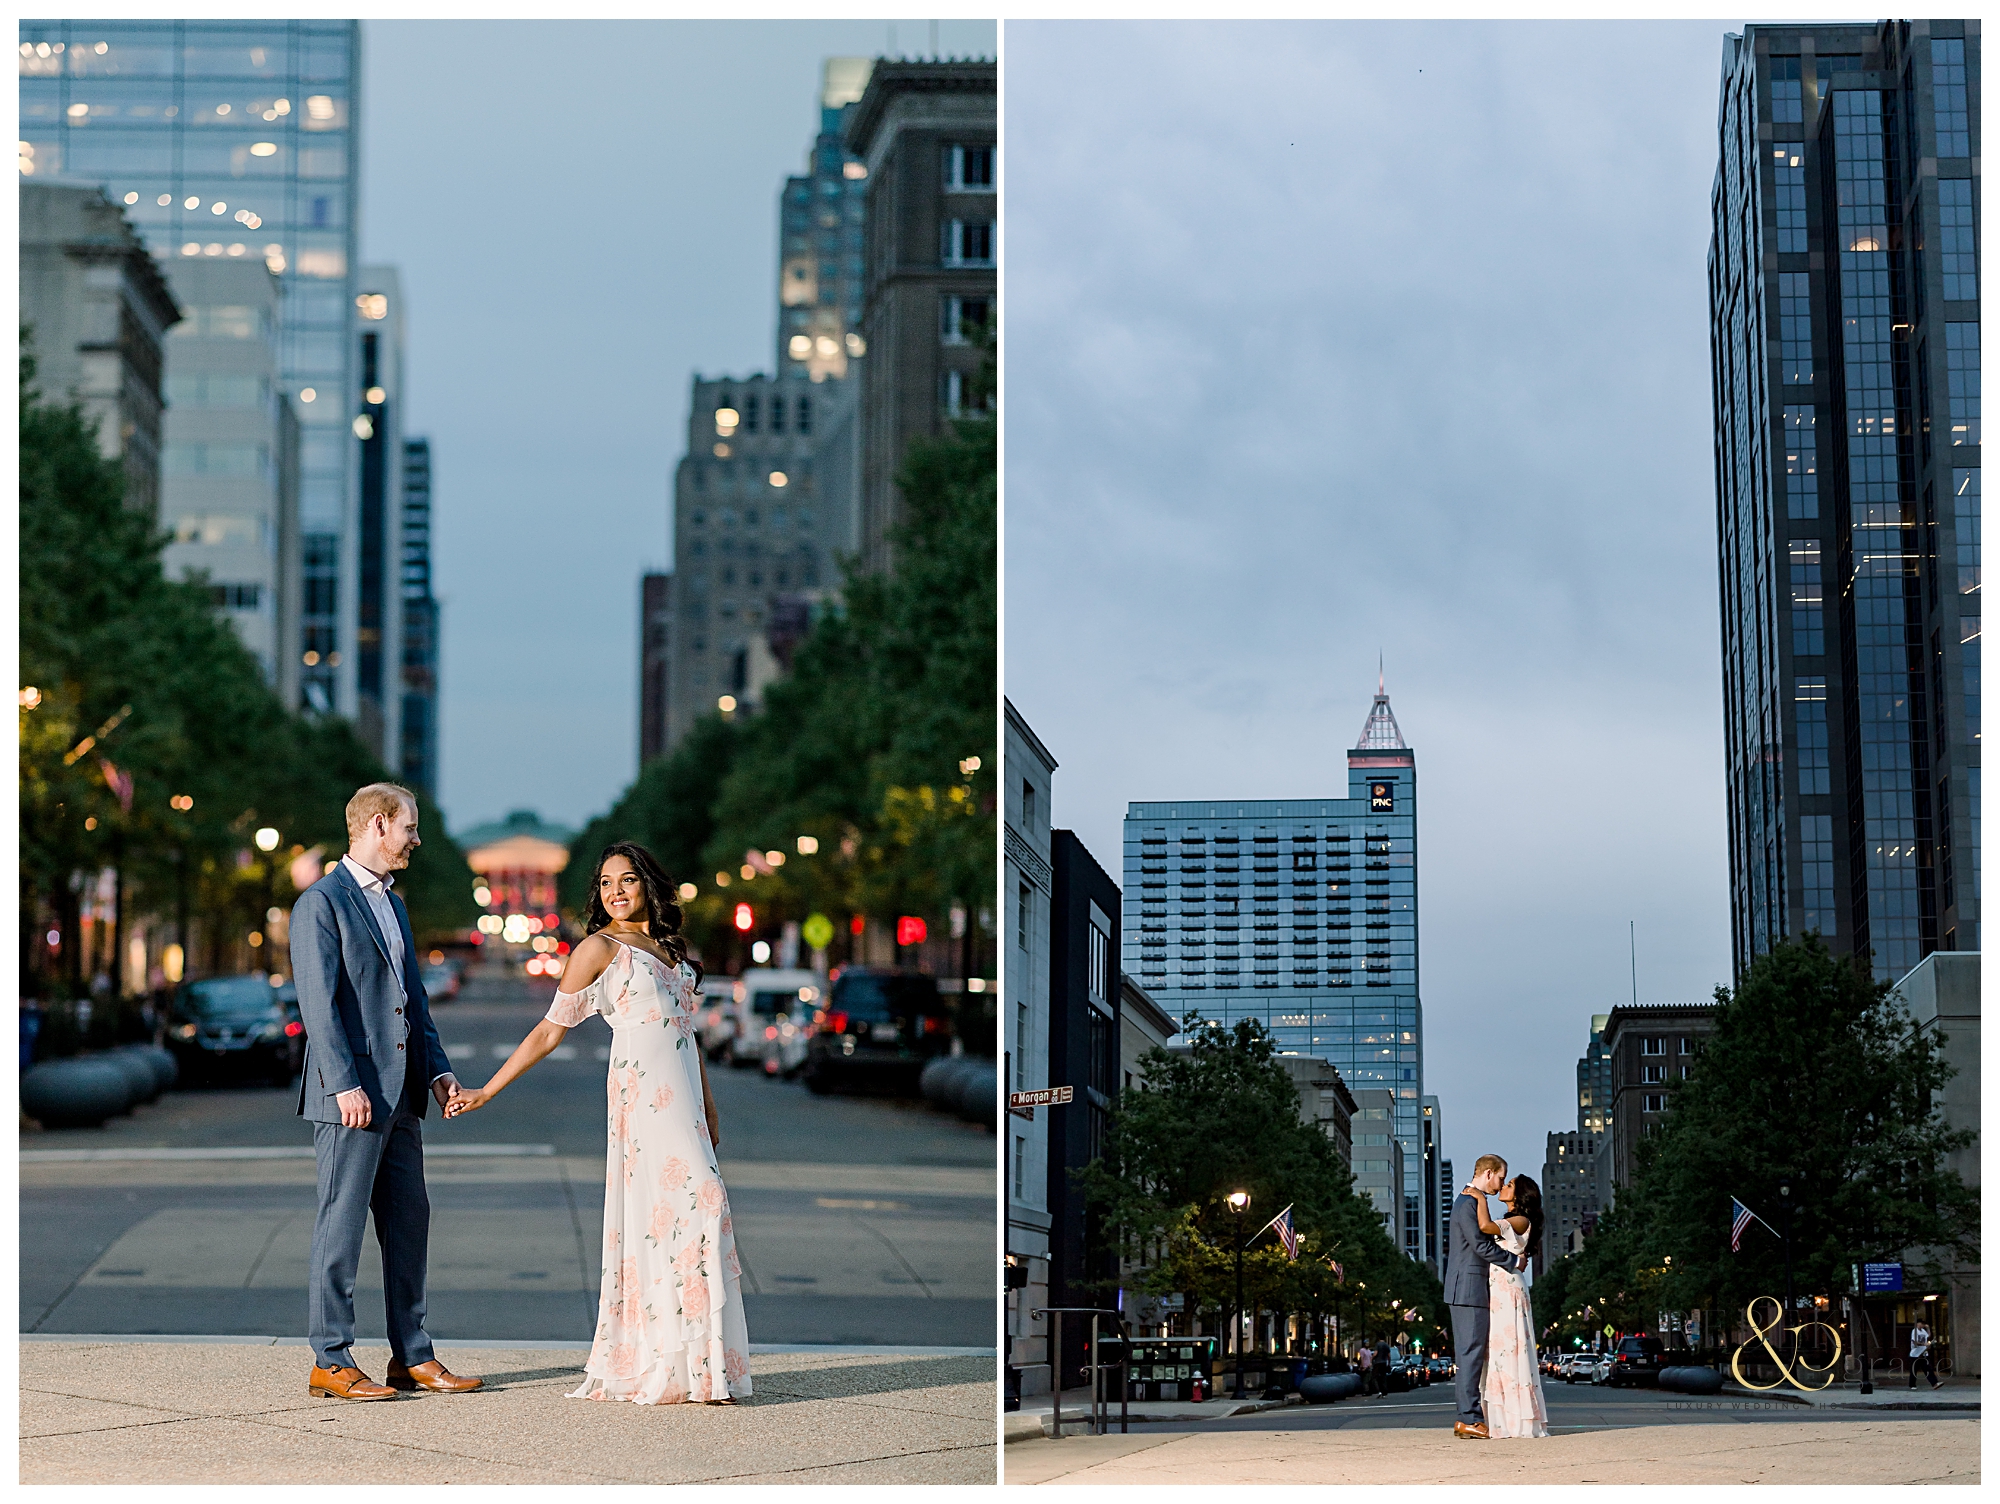 Engagement Photography | Night city lights in Downtown Raleigh, North Carolina. | Photography by Rebekah & Grace Photography.